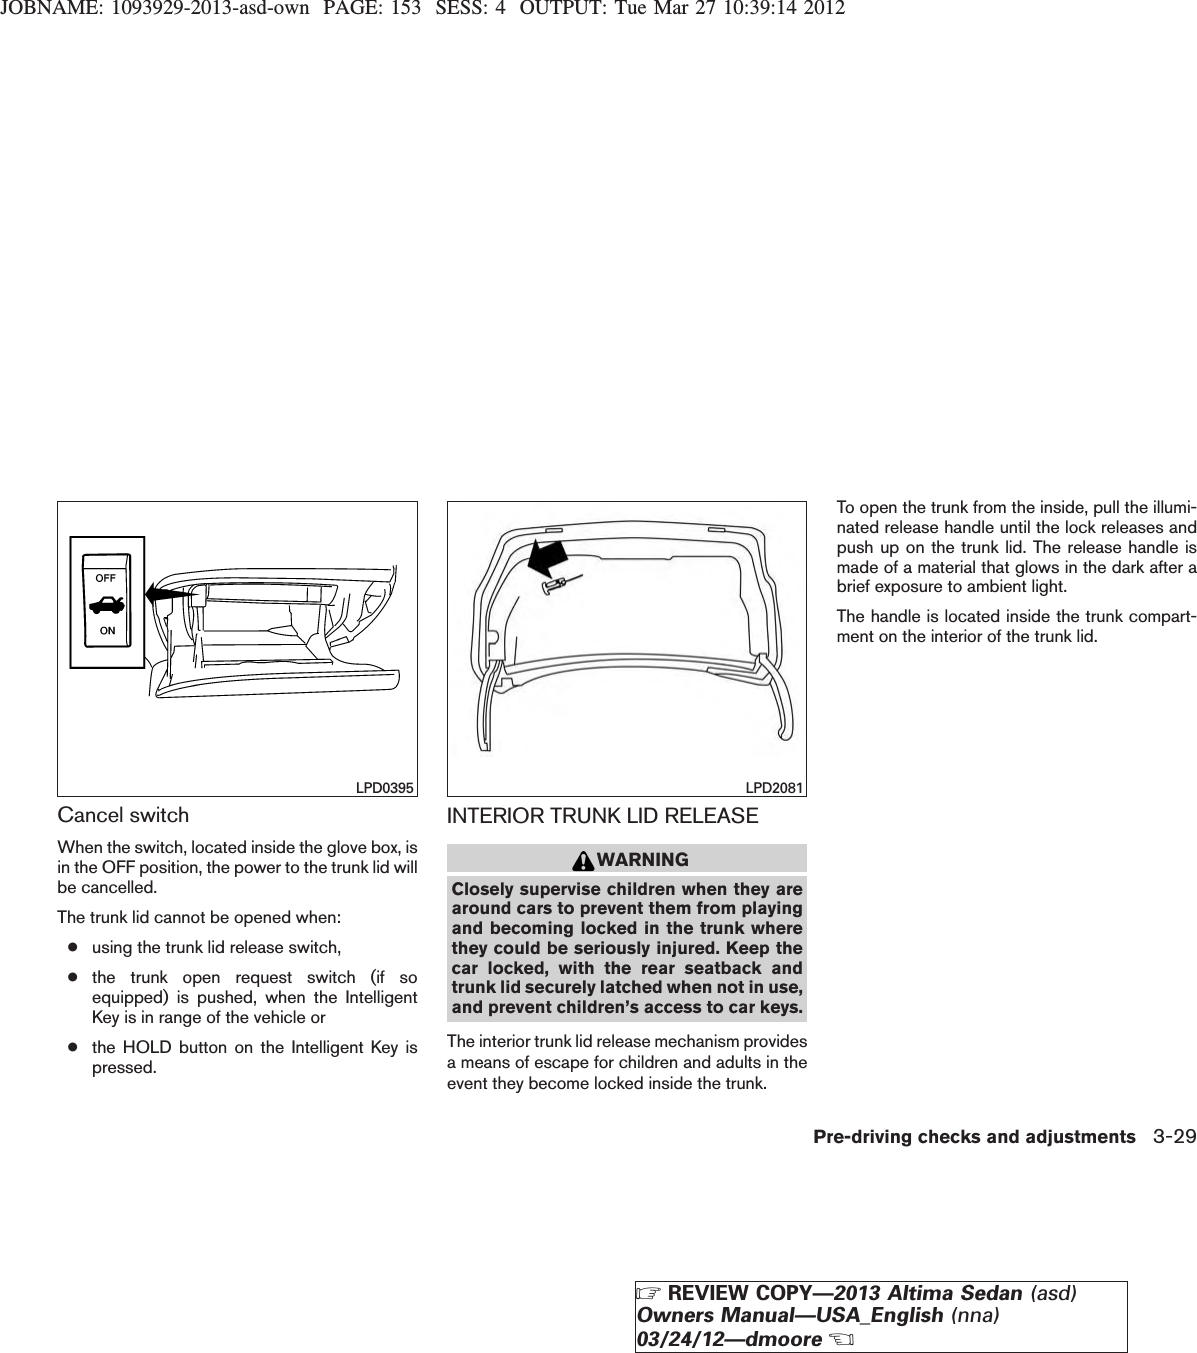 JOBNAME: 1093929-2013-asd-own PAGE: 153 SESS: 4 OUTPUT: Tue Mar 27 10:39:14 2012Cancel switchWhen the switch, located inside the glove box, isin the OFF position, the power to the trunk lid willbe cancelled.The trunk lid cannot be opened when:●using the trunk lid release switch,●the trunk open request switch (if soequipped) is pushed, when the IntelligentKey is in range of the vehicle or●the HOLD button on the Intelligent Key ispressed.INTERIOR TRUNK LID RELEASEWARNINGClosely supervise children when they arearound cars to prevent them from playingand becoming locked in the trunk wherethey could be seriously injured. Keep thecar locked, with the rear seatback andtrunk lid securely latched when not in use,and prevent children’s access to car keys.The interior trunk lid release mechanism providesa means of escape for children and adults in theevent they become locked inside the trunk.To open the trunk from the inside, pull the illumi-nated release handle until the lock releases andpush up on the trunk lid. The release handle ismade of a material that glows in the dark after abrief exposure to ambient light.The handle is located inside the trunk compart-ment on the interior of the trunk lid.LPD0395 LPD2081Pre-driving checks and adjustments 3-29ZREVIEW COPY—2013 Altima Sedan (asd)Owners Manual—USA_English (nna)03/24/12—dmooreX